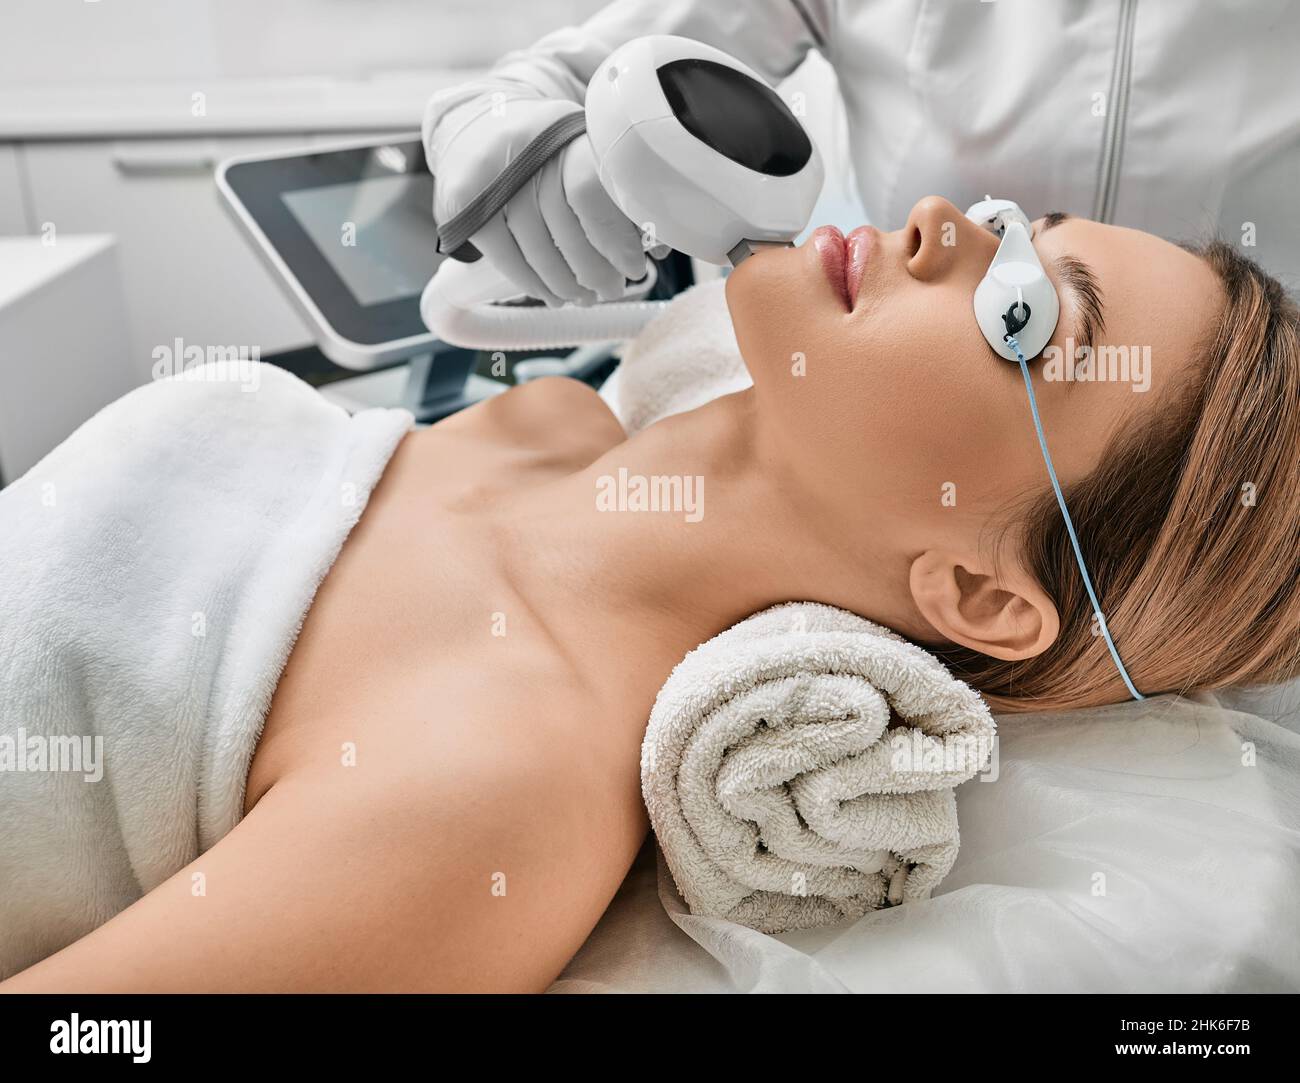 Photorejuvenation, rosacea treatment, removing brown spots and vascular mesh. Cosmetologist using IPL apparatus treats skin of female patient's face Stock Photo